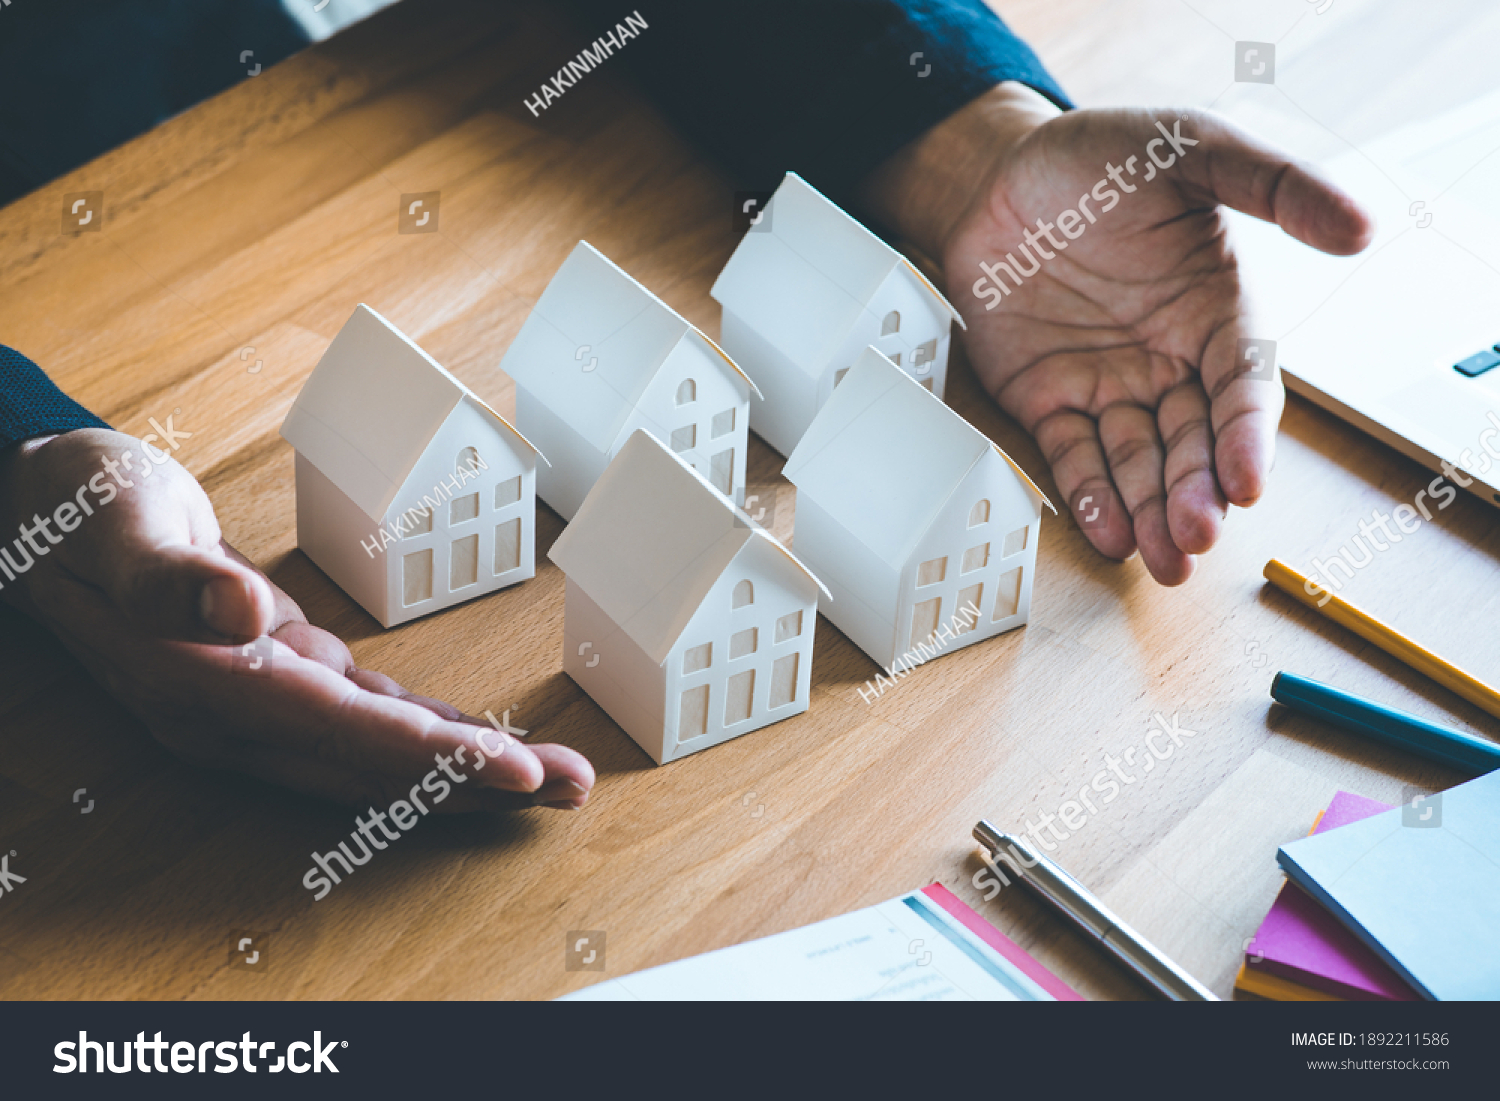 Business property,real estate and investment concepts with investor and white model house on desk background. #1892211586